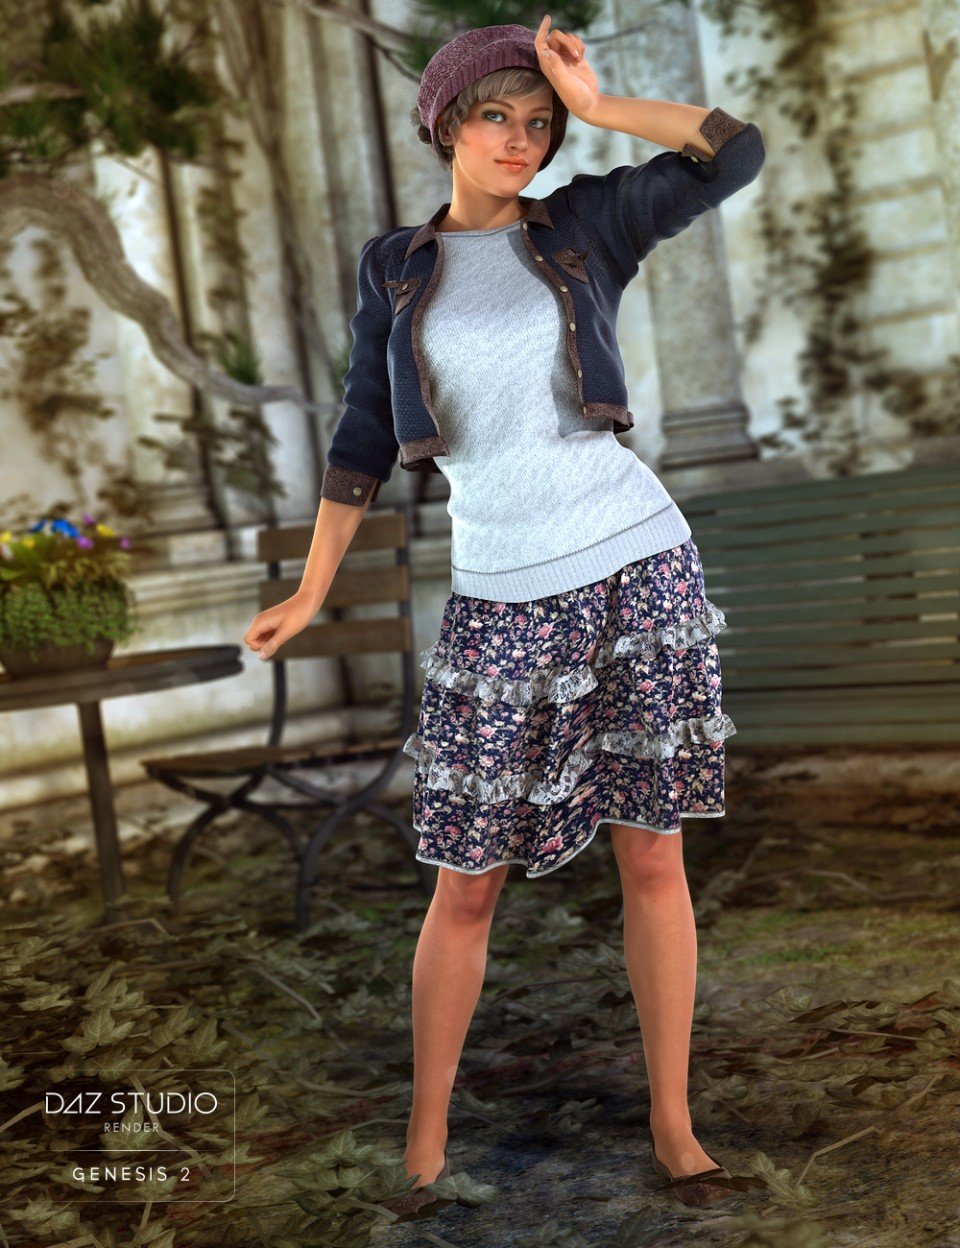 Smells Like Fall for Genesis 2 Female(s) + Textures_DAZ3DDL